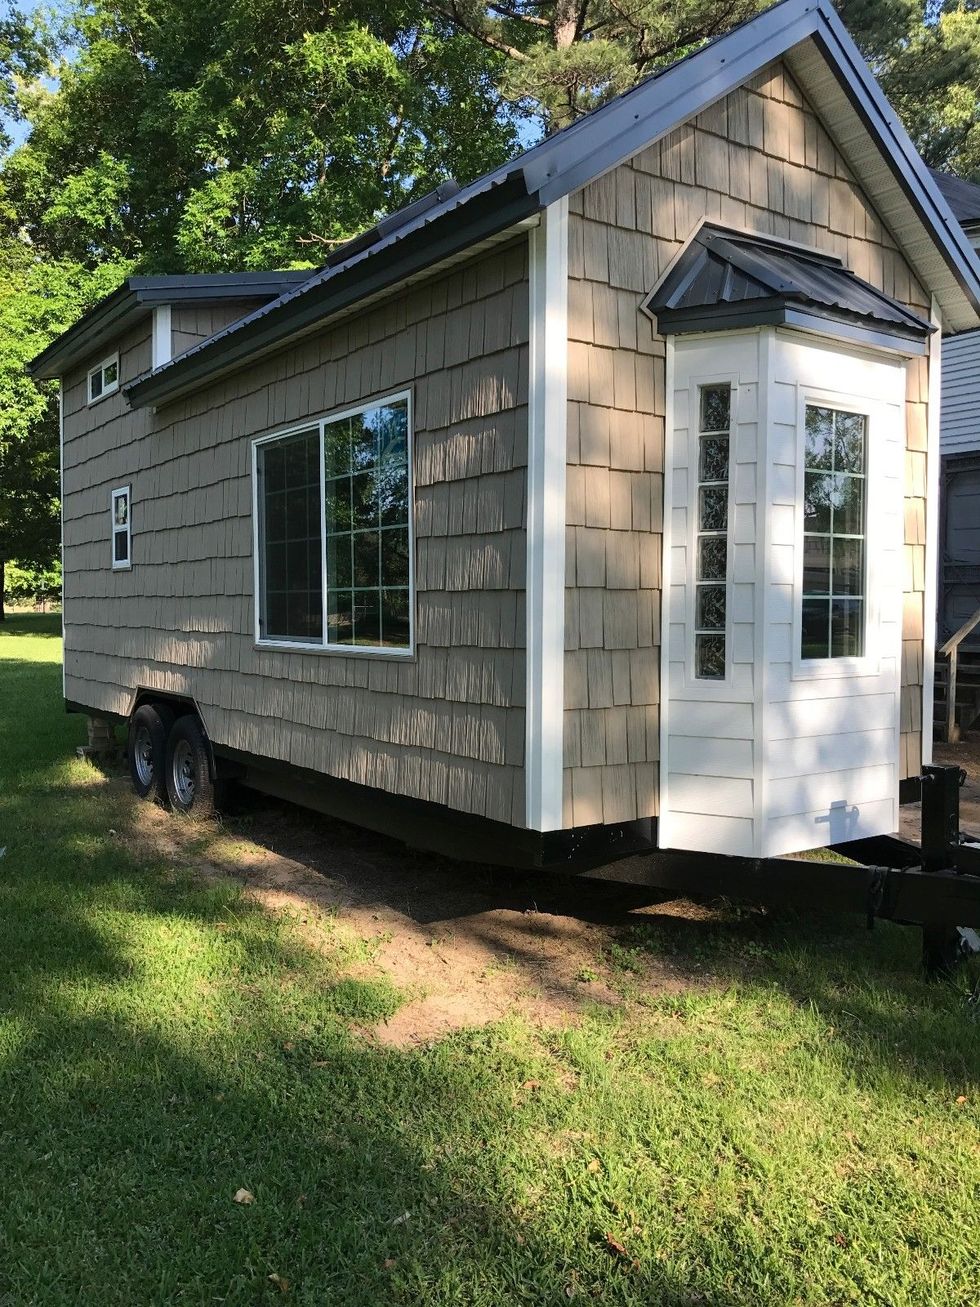 Year Four: Tiny House Living, New Spaces, and New Adventure!